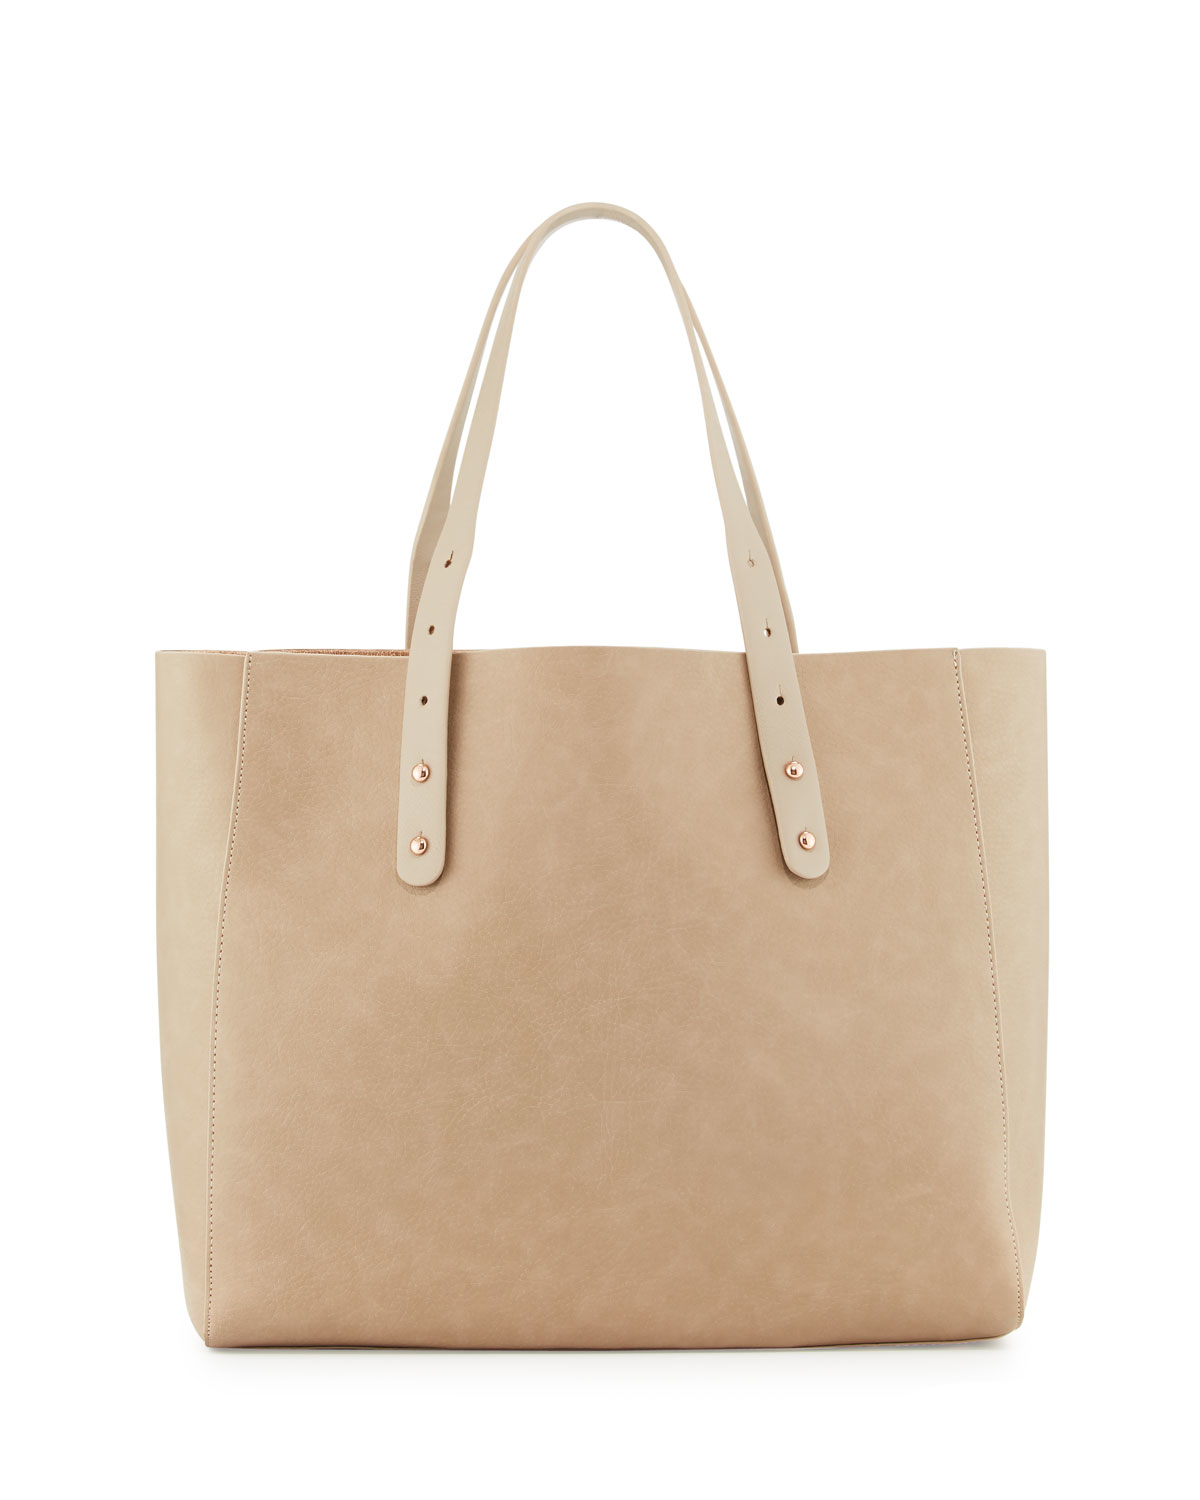 Lyst - Neiman Marcus Metallic-lined Tote Bag in Natural